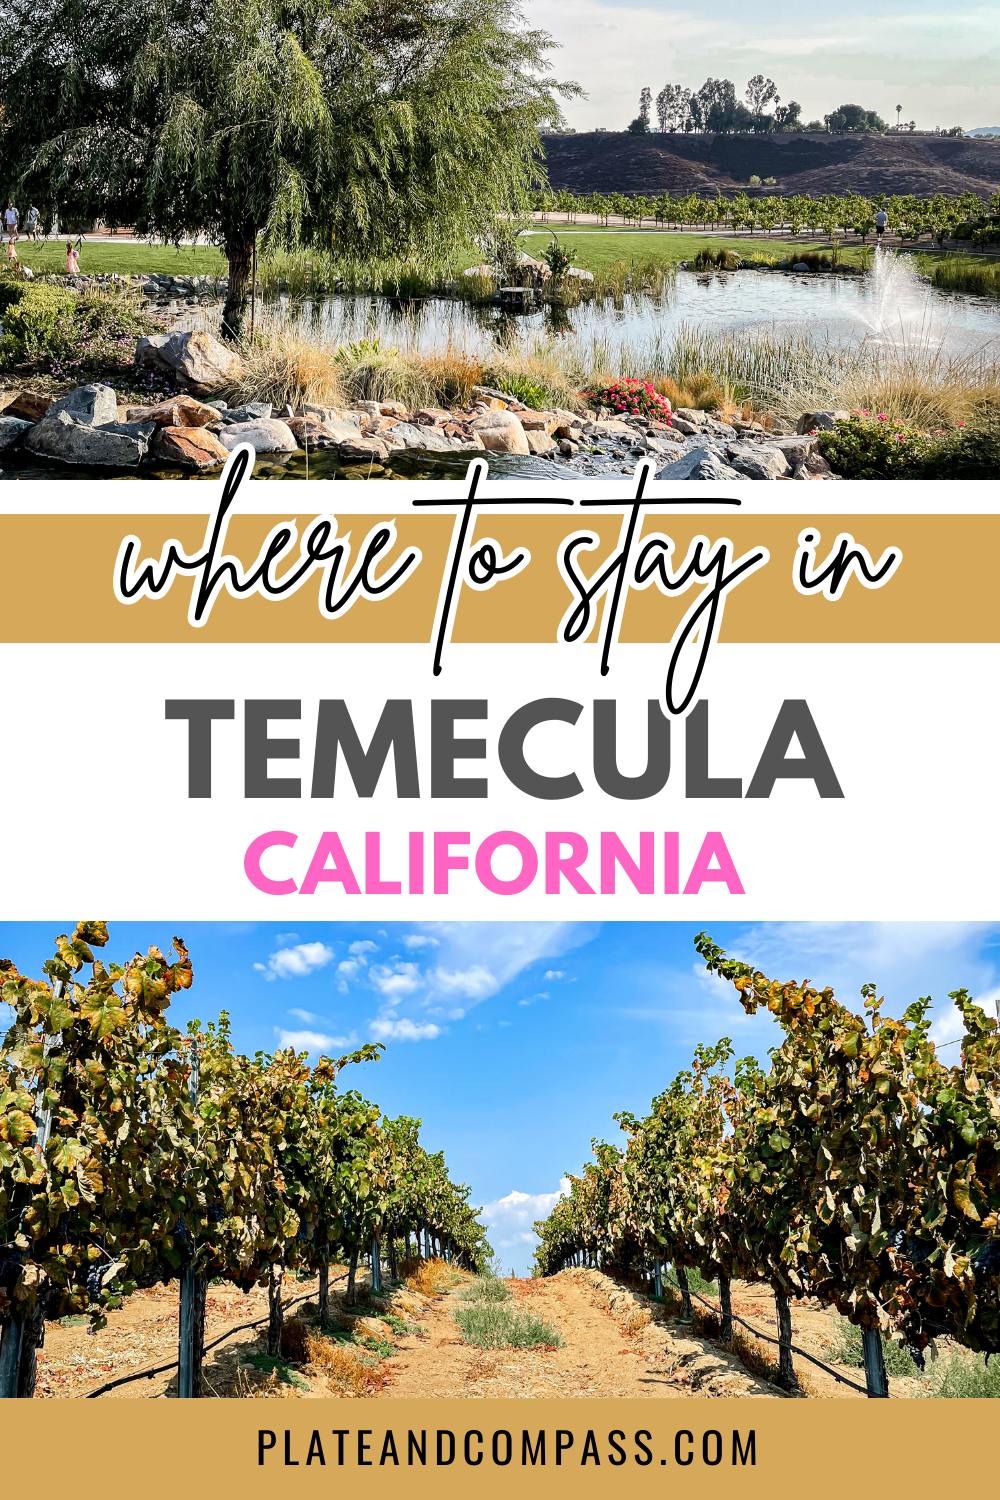 Where to stay in Temecula California